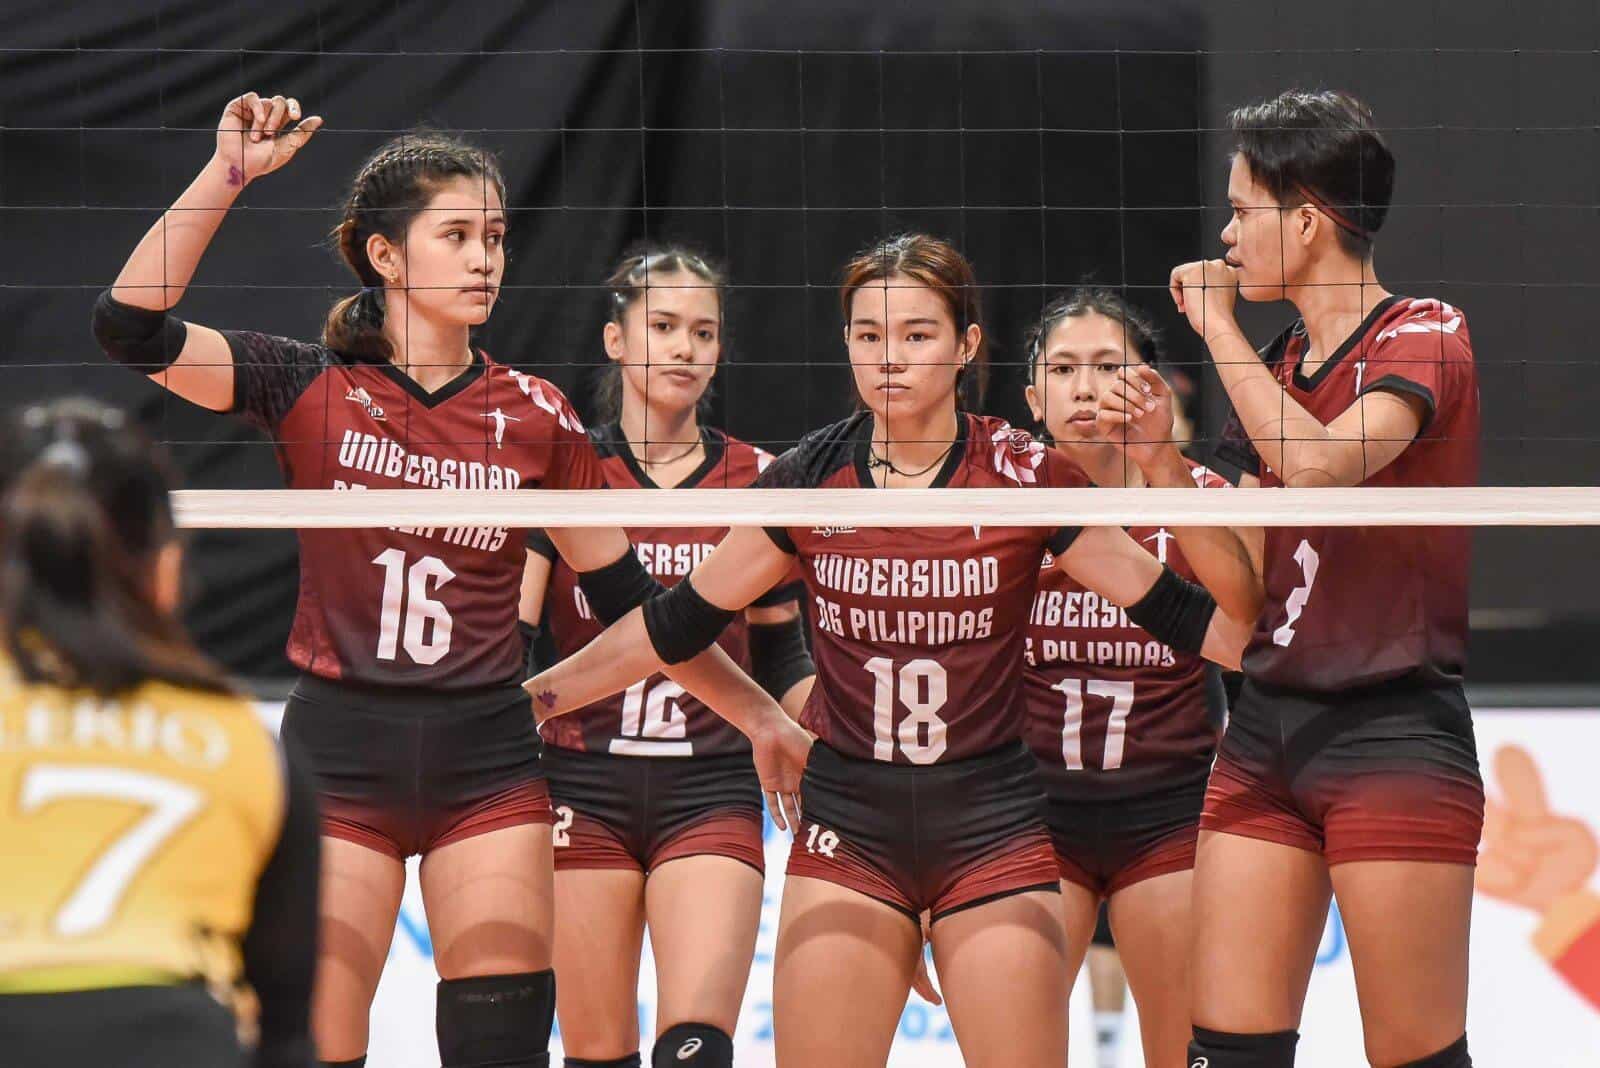 A group of female UP Fighting Maroons volleyball players are standing on a court.